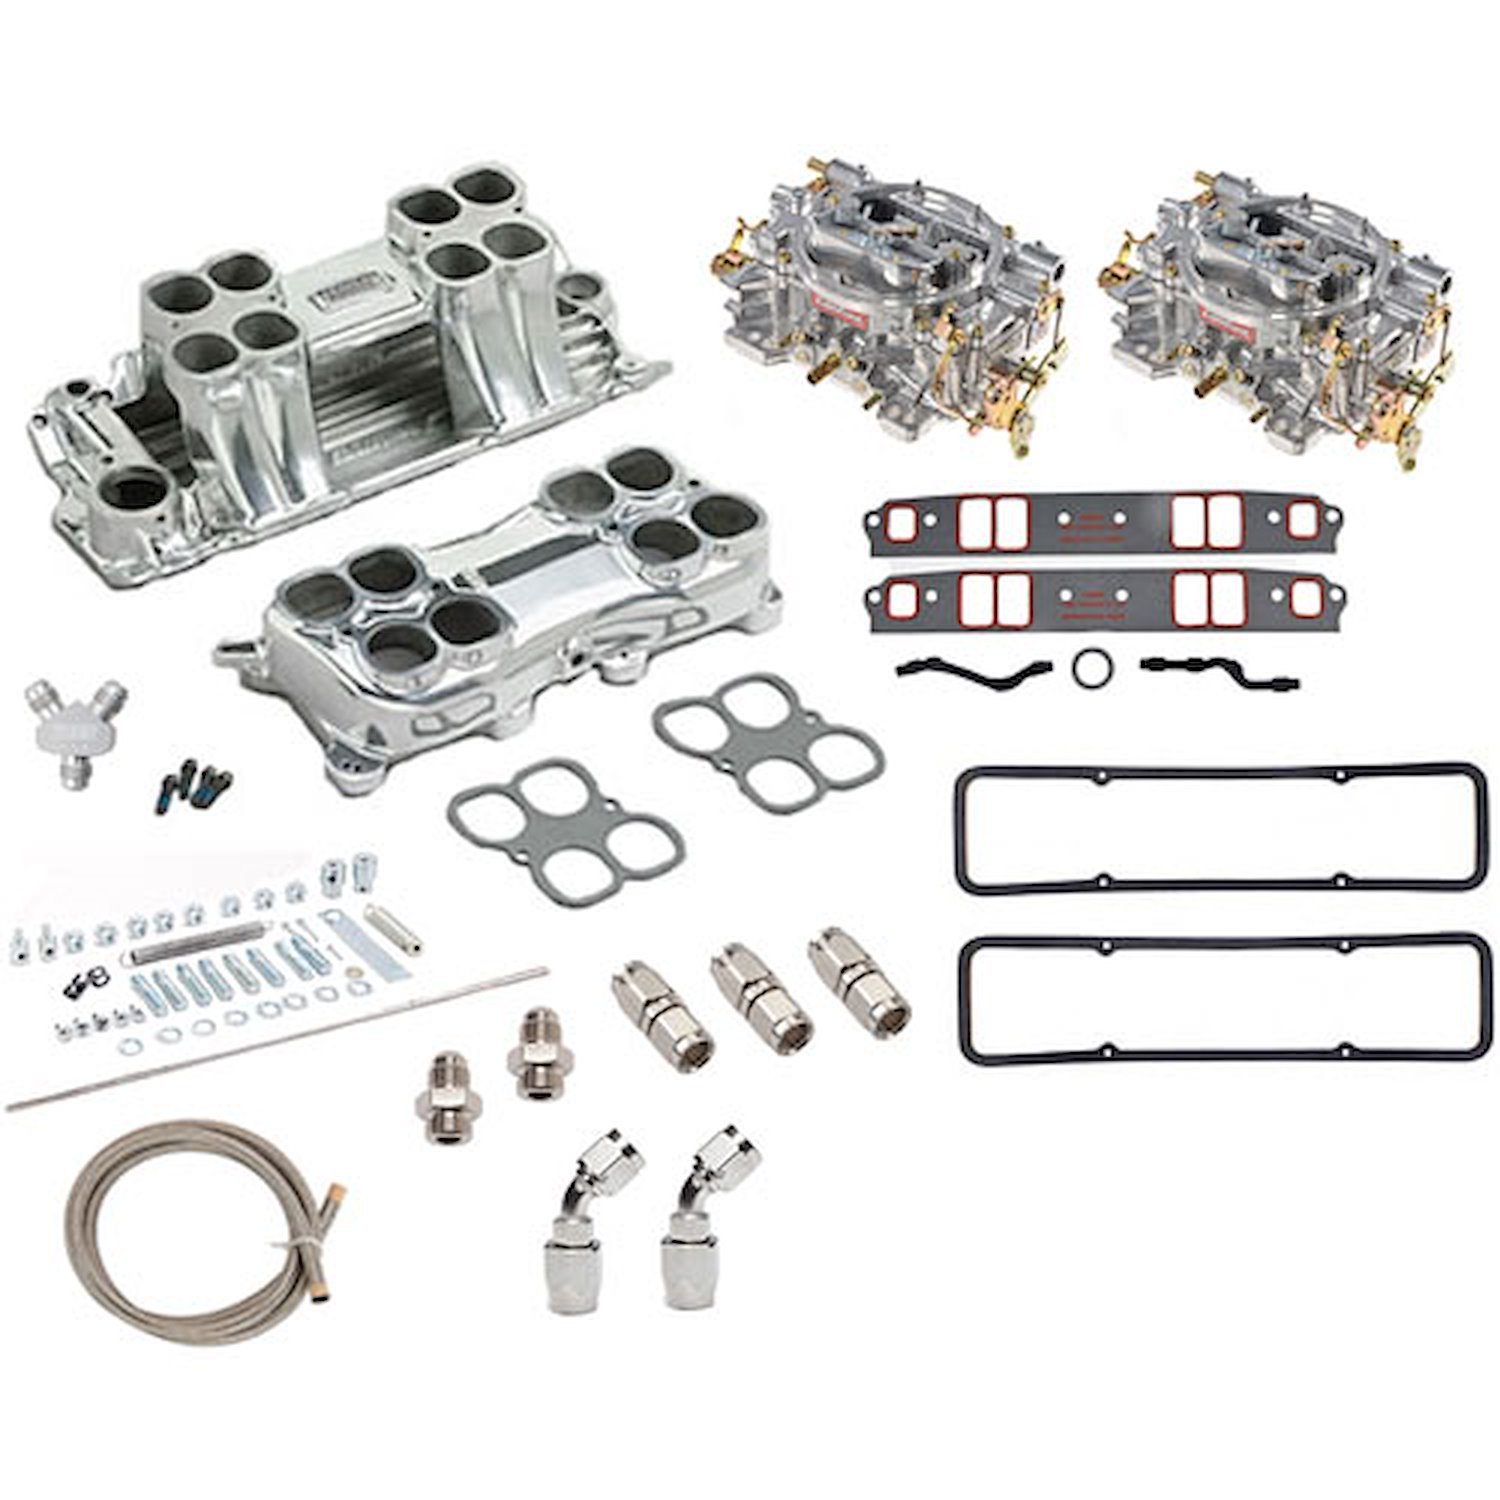 Small Block Chevy Tunnel Ram Kit Includes: Intake Manifold